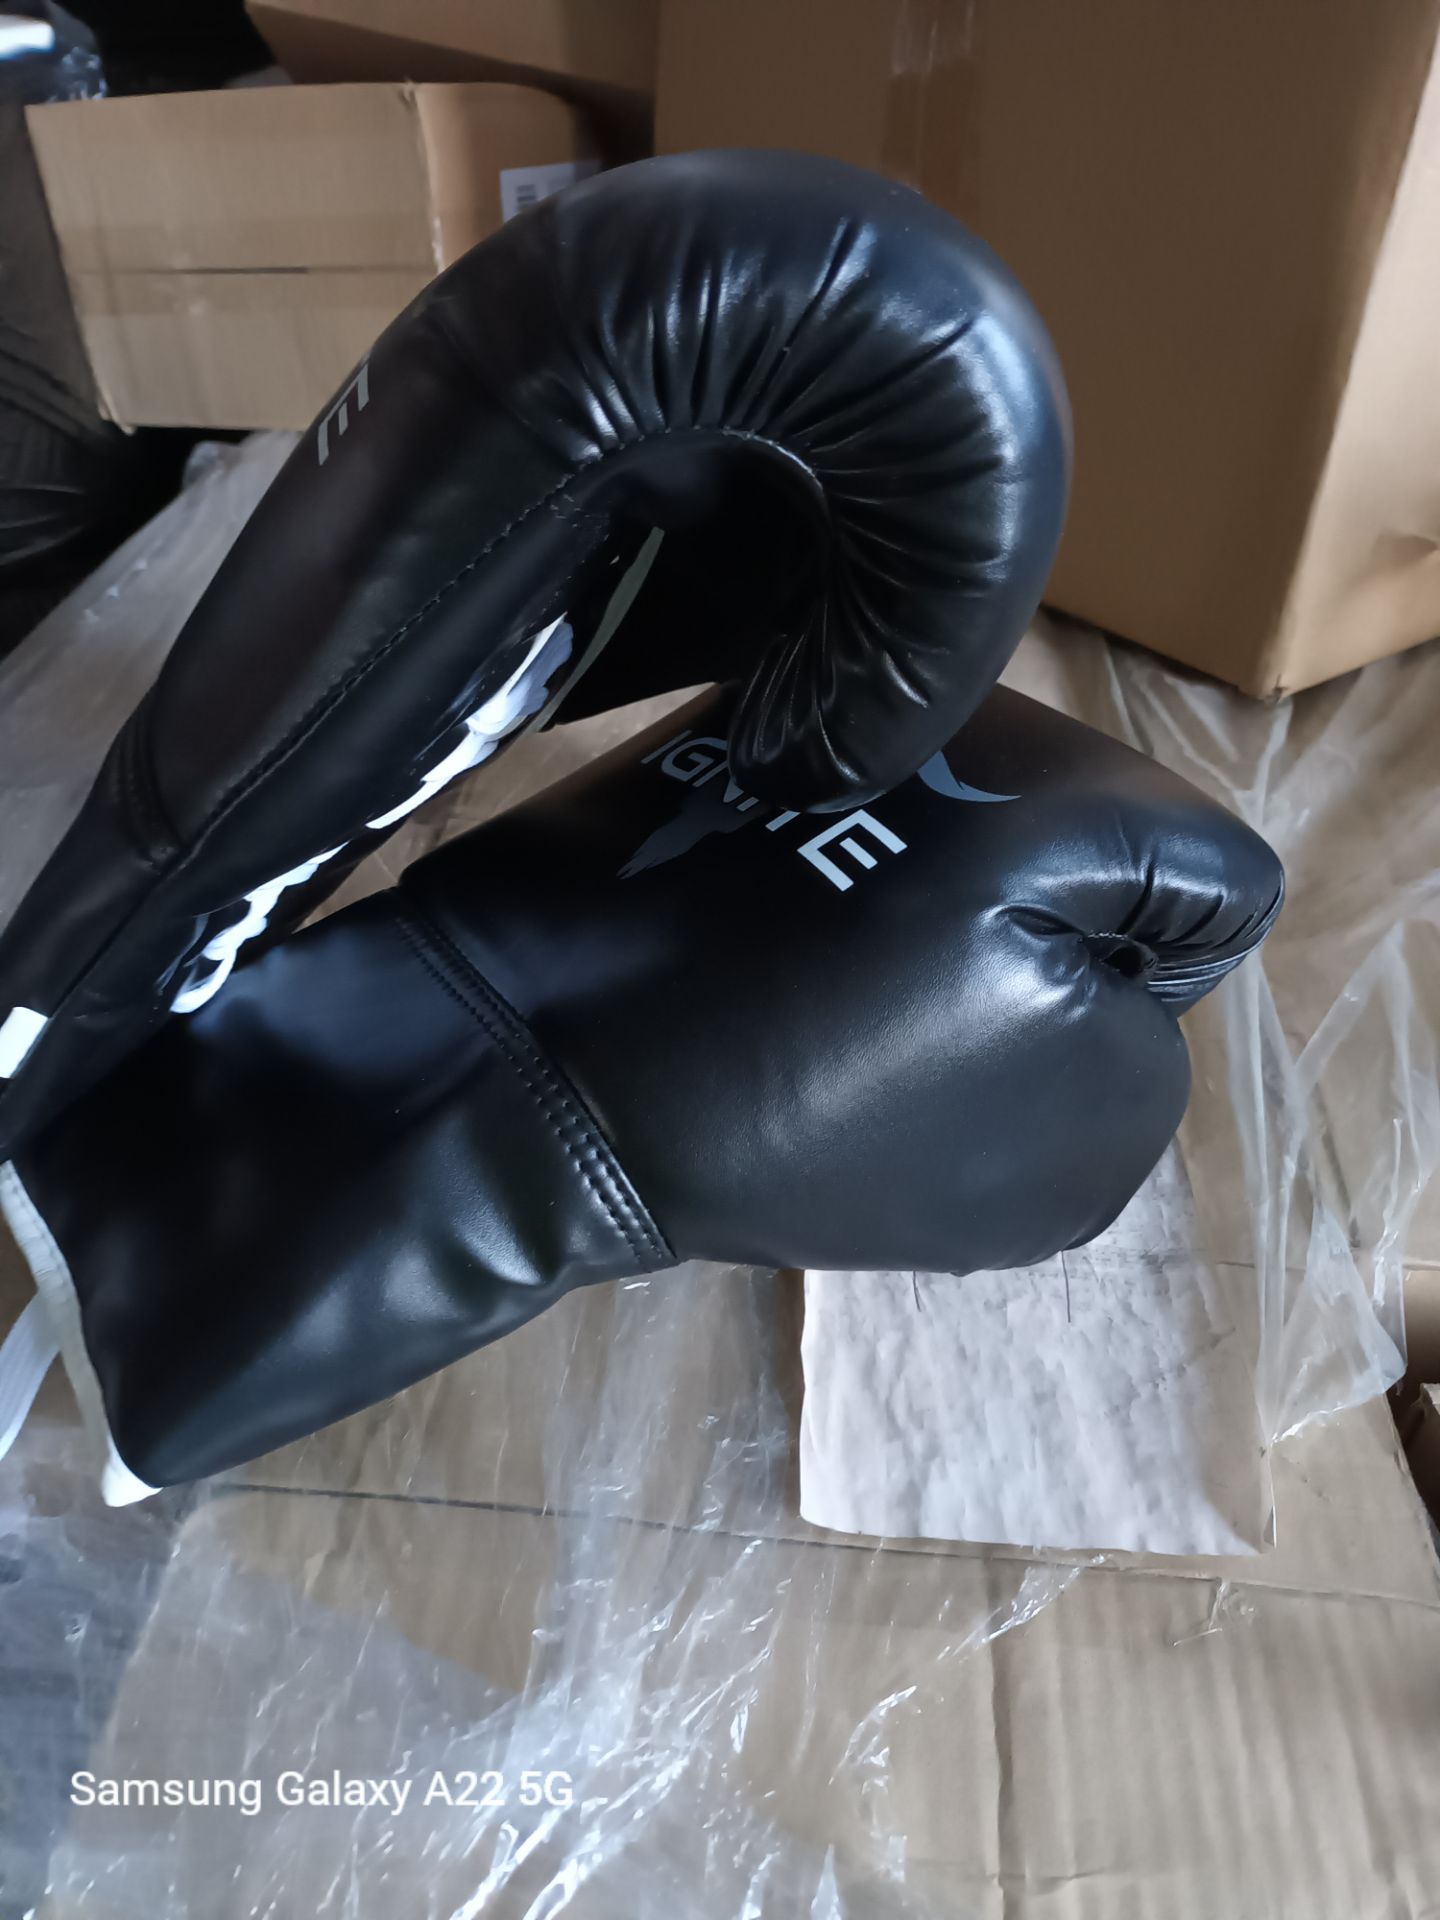 PALLET OF APPROX 150 PAIRS OF ADULT BOXING GLOVES